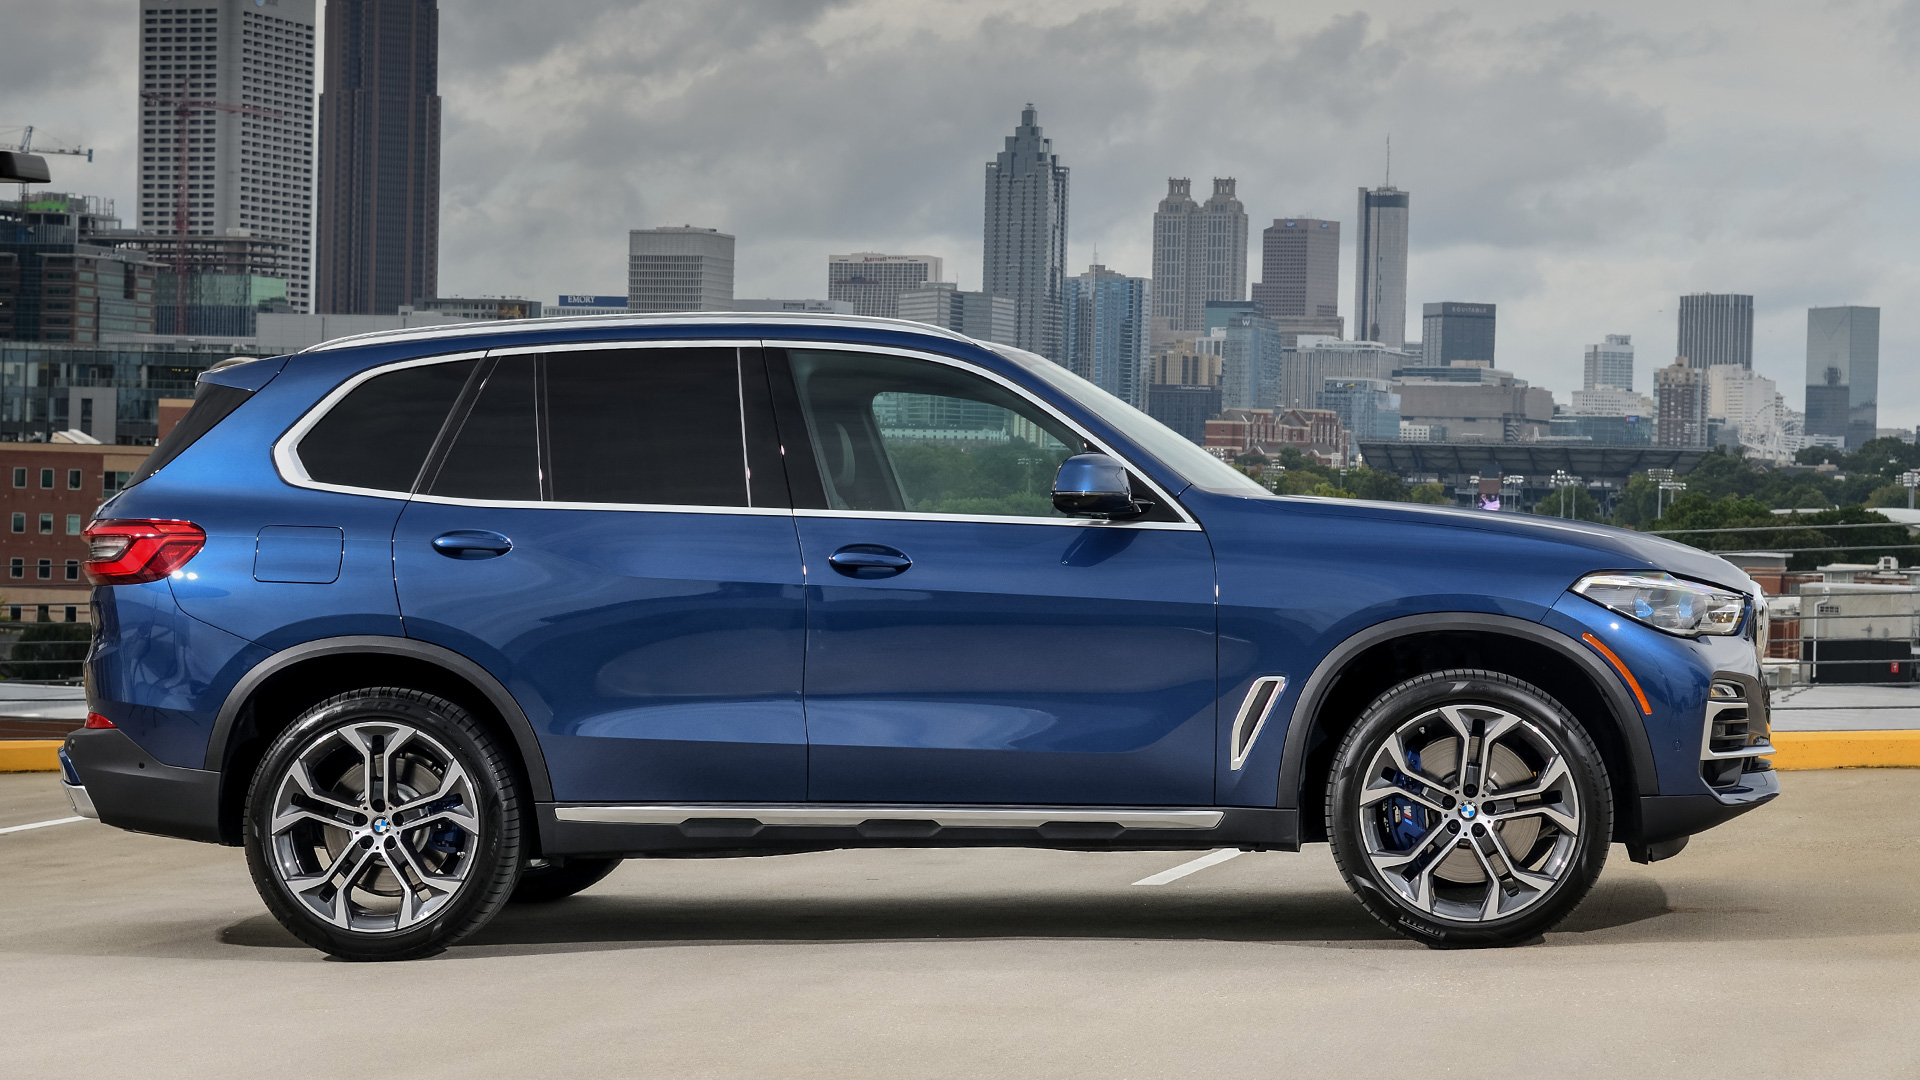 Modern Bmw X5 2019 Exterior for Large Space